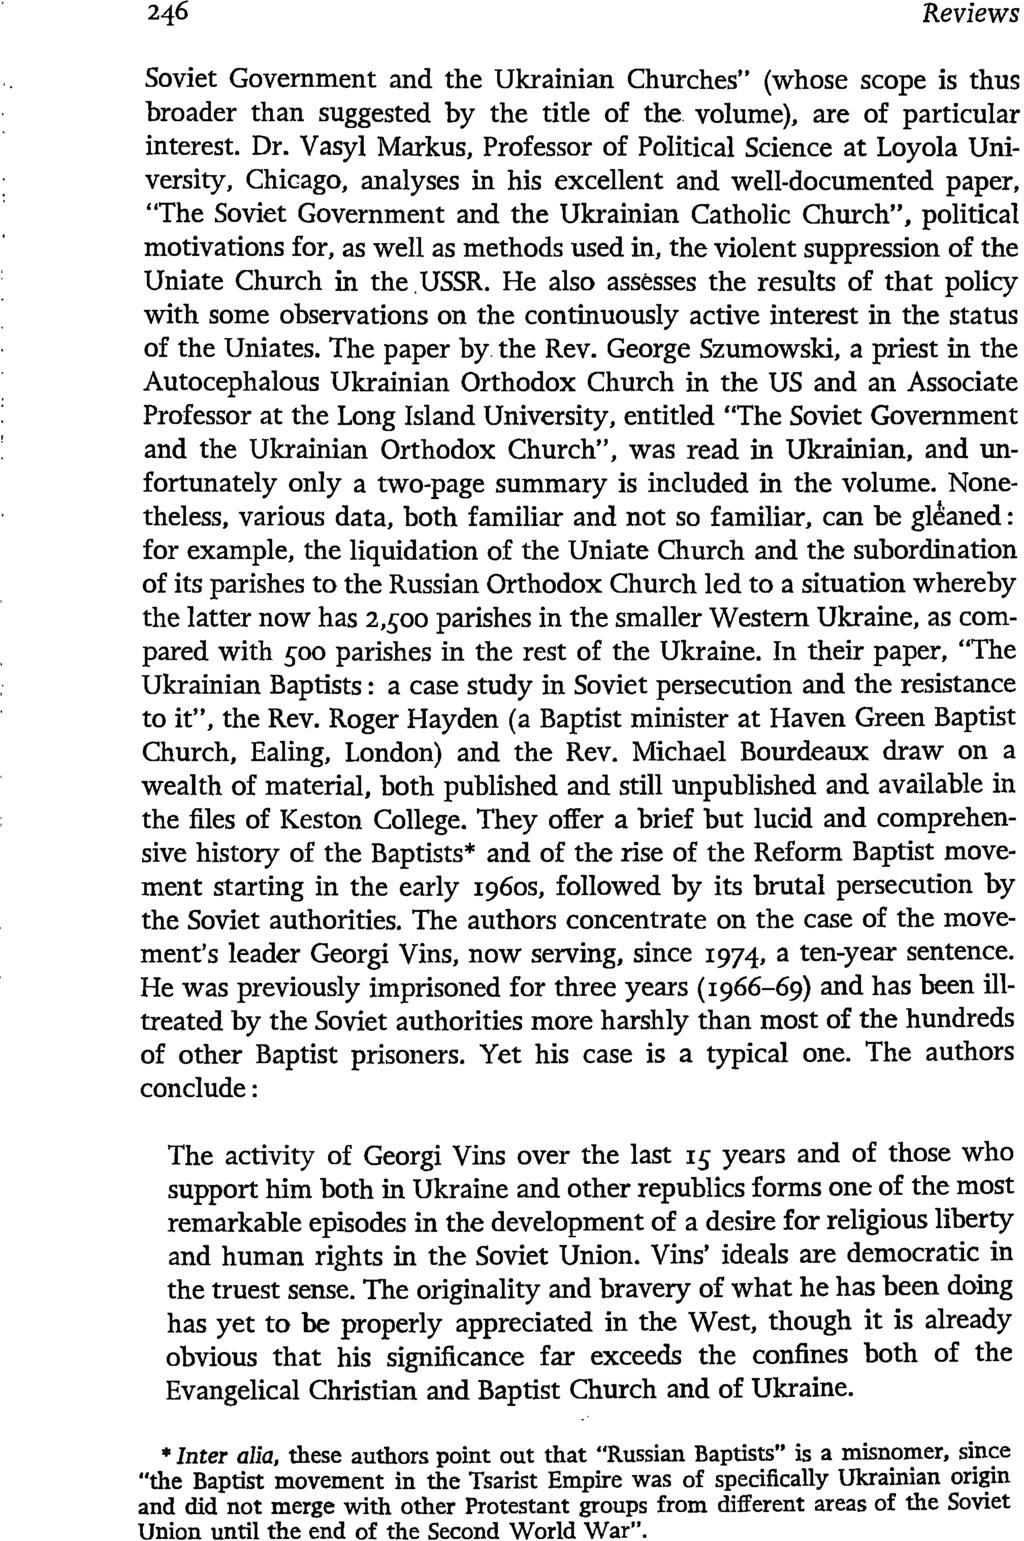 Reviews Soviet Government and the Ukrainian Churches" (whose scope is thus broader than suggested by the title of the volume), are of particular interest. Dr.